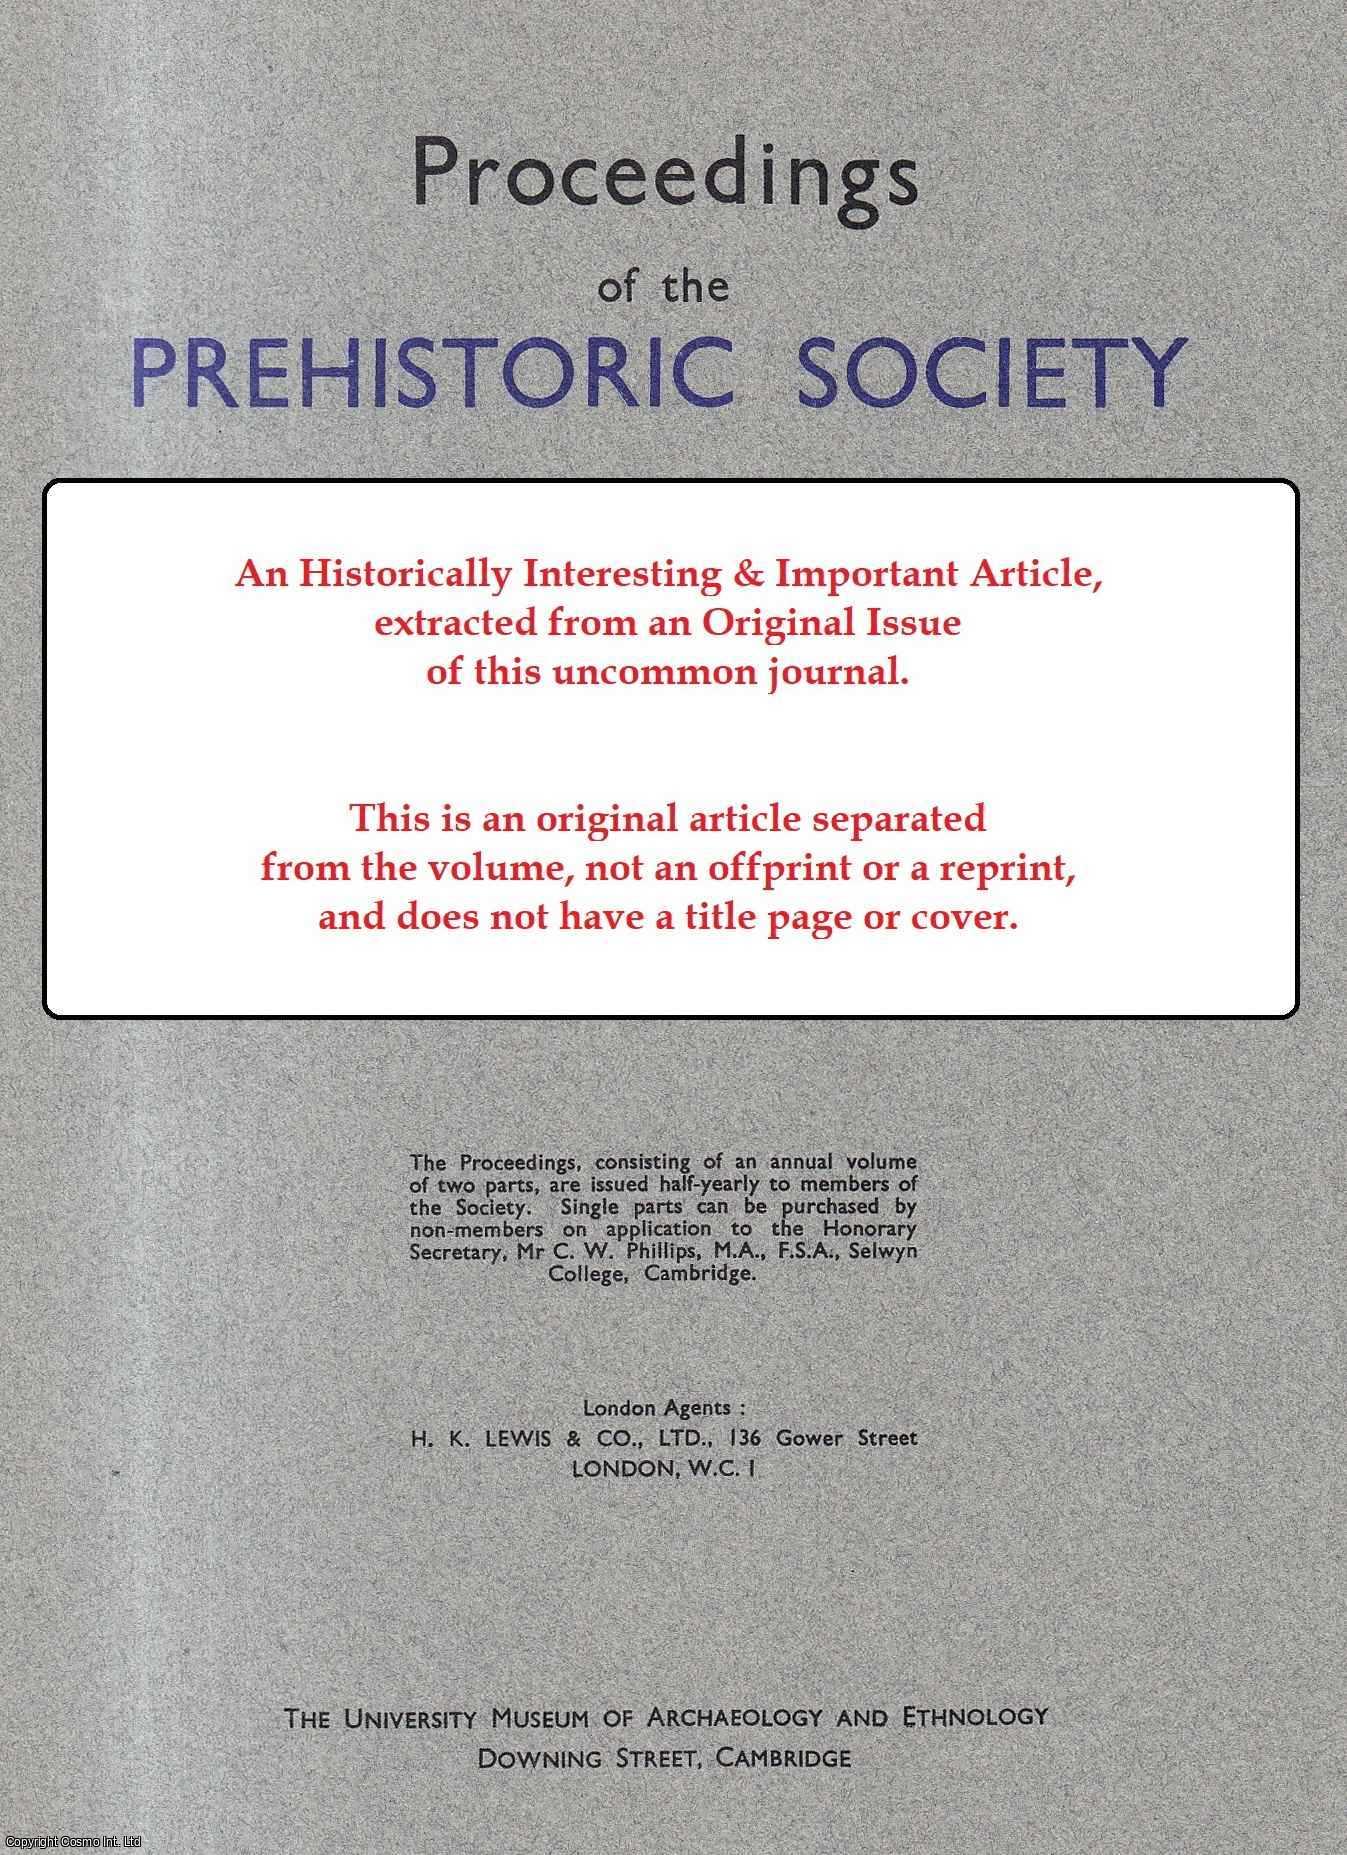 J. Banner - Research on The Hungarian Bronze Age Since 1936 and The Bronze Age Settlement at Bekes-Vardomb. An original article from Proceedings of the Prehistoric Society, 1955.